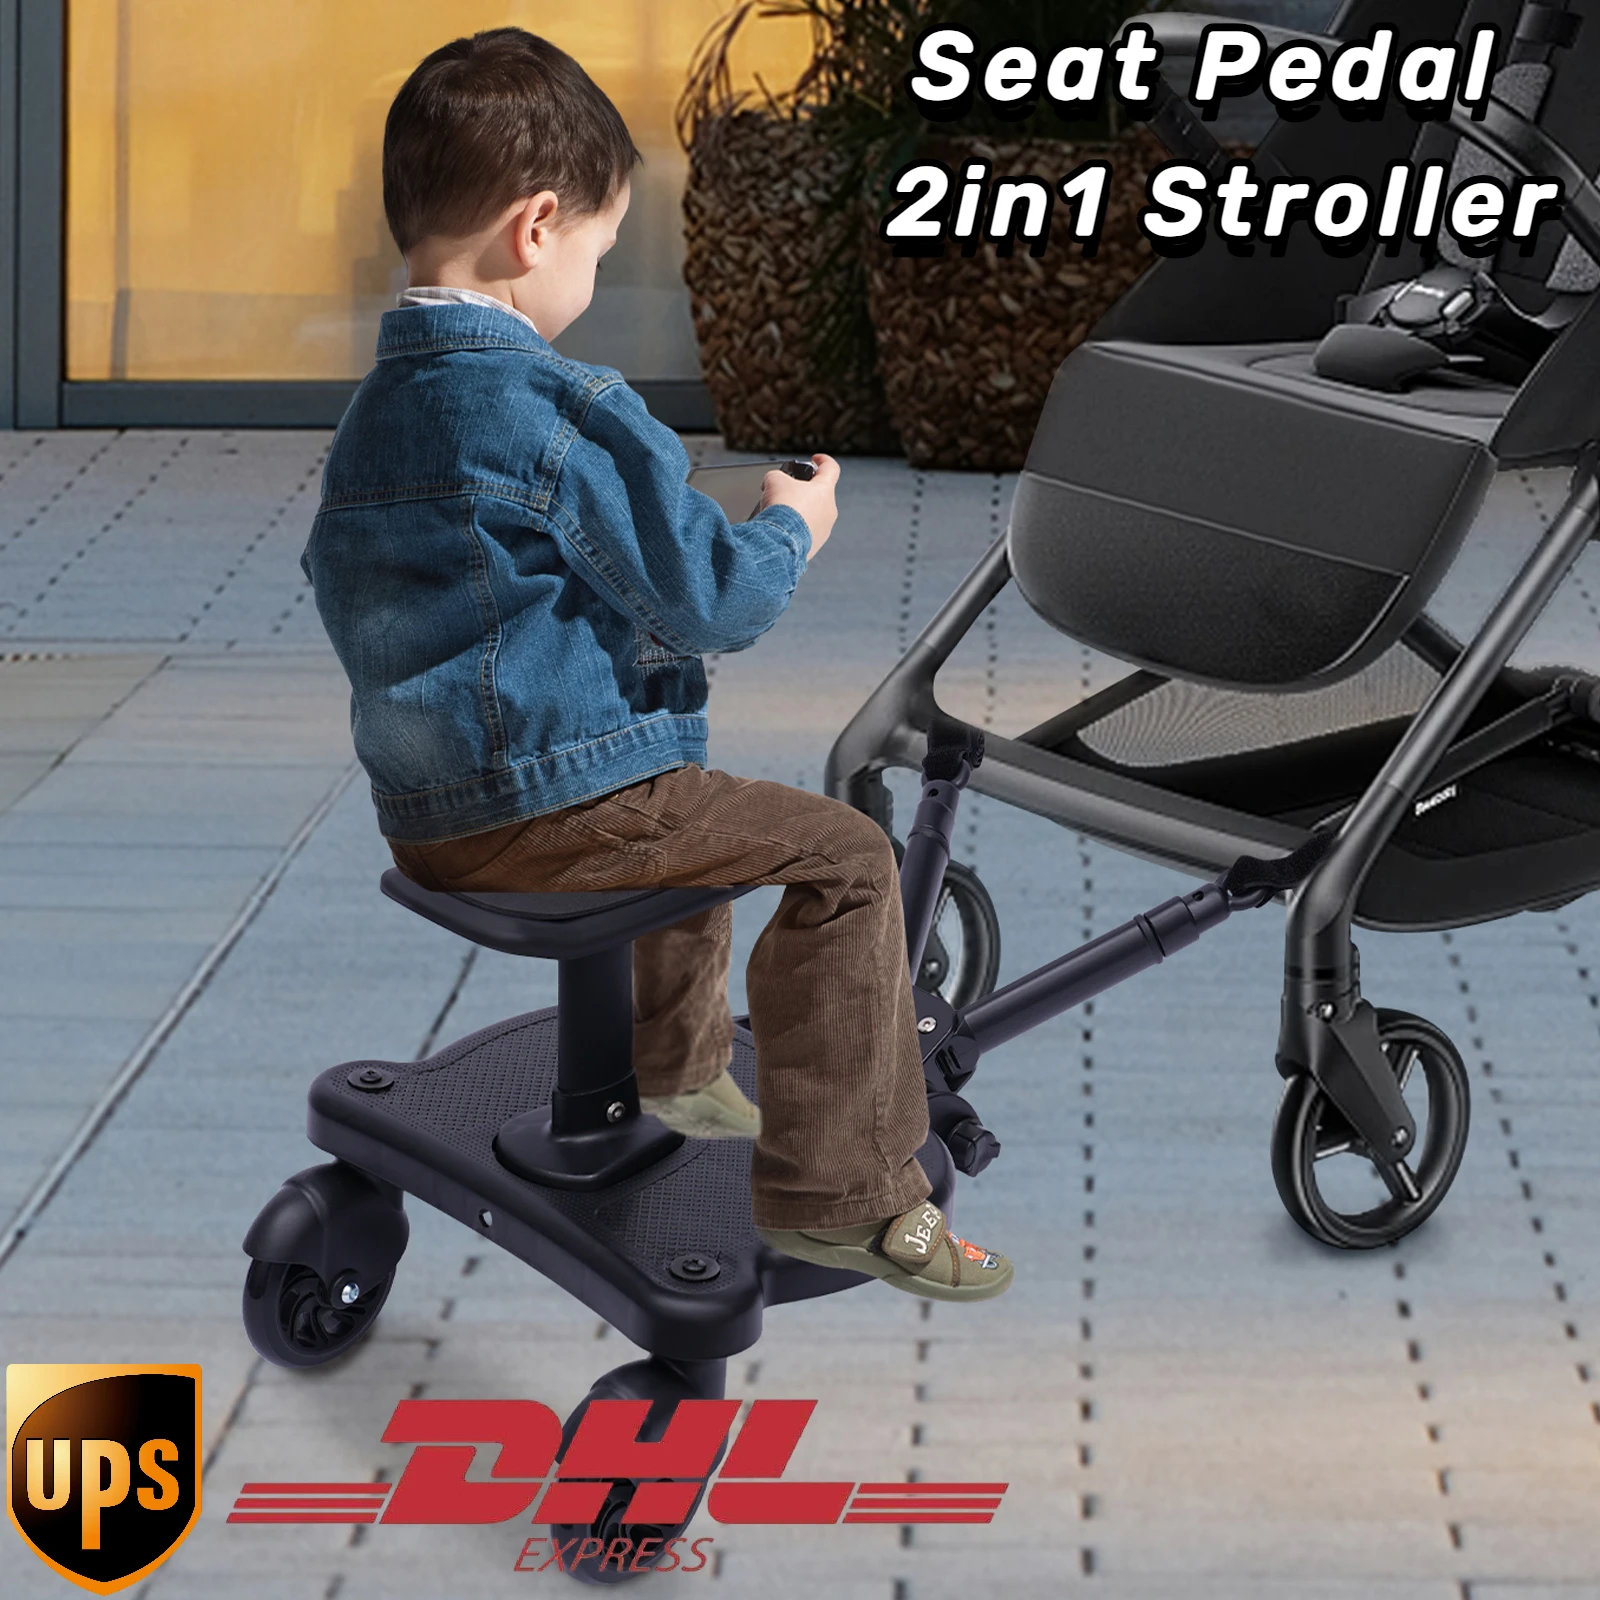 Stroller Board Universal 2in1 Stroller Ride Board Buggy Wheeled Board Seat Pedal with Detachable Seat Standing Board 